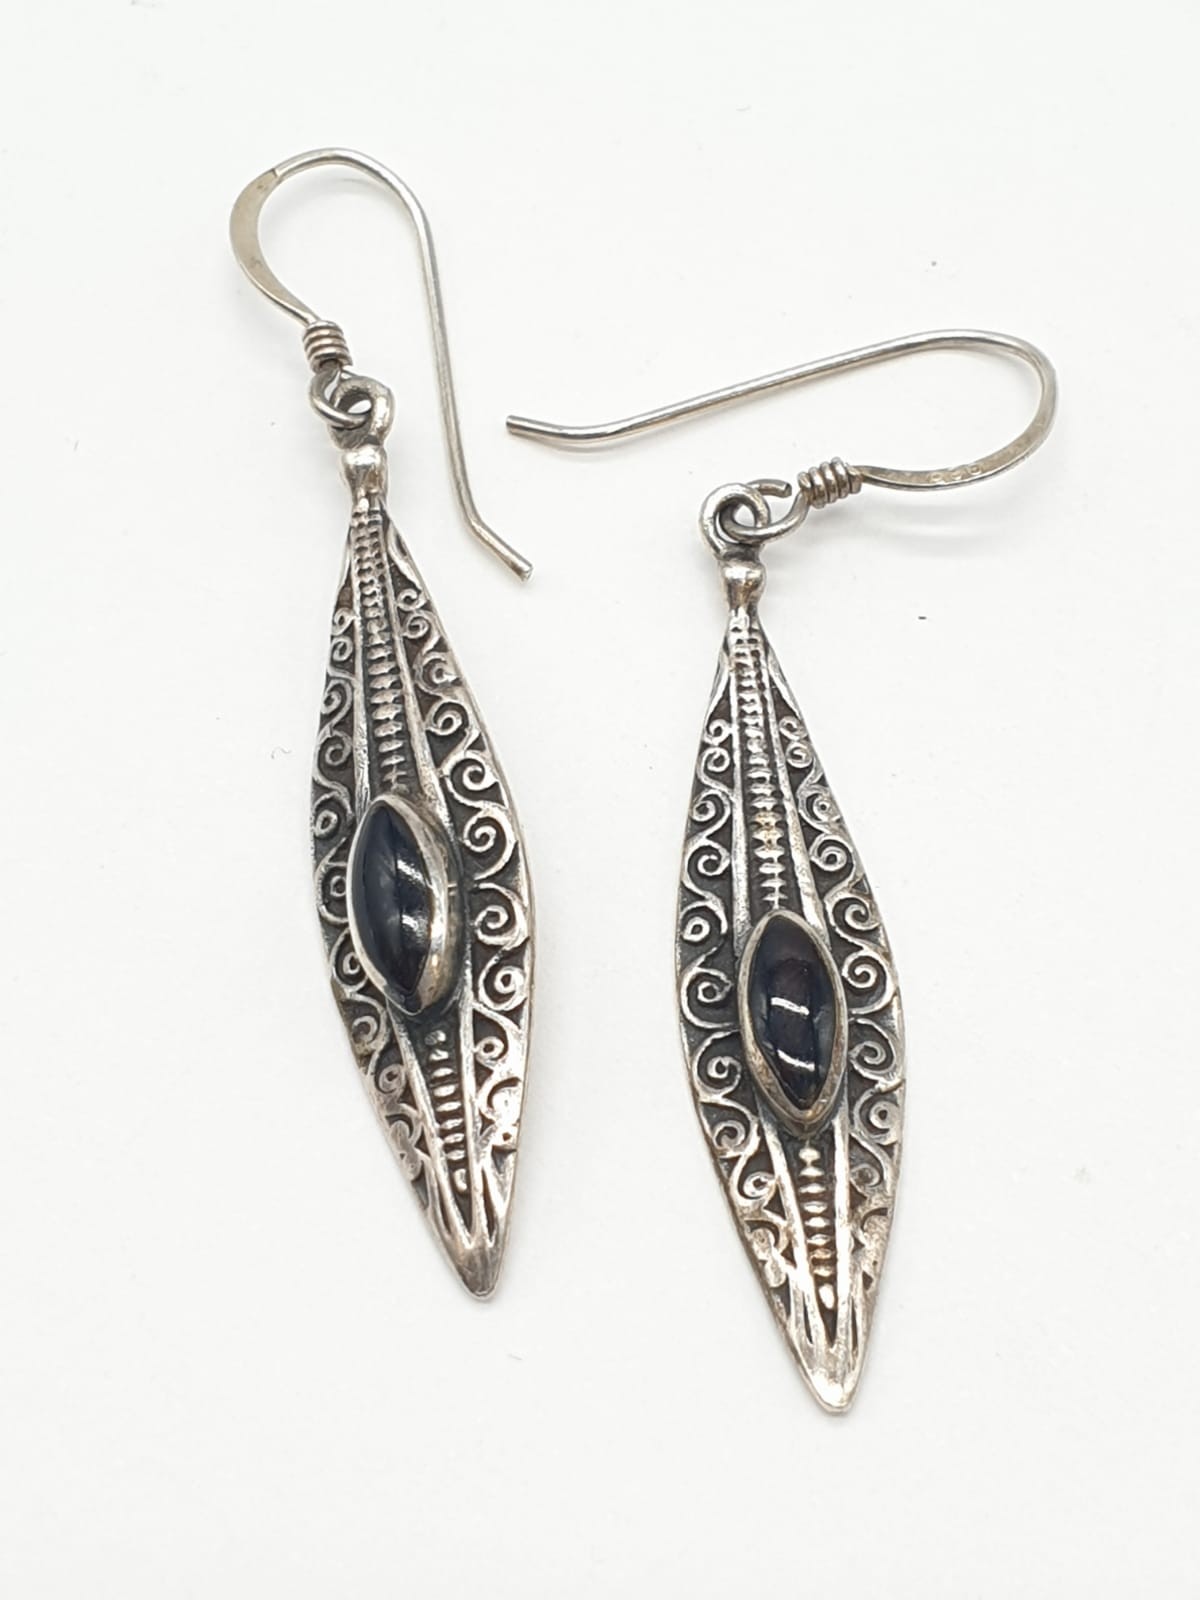 A pair of silver and black onyx earrings. Boat shaped. Marked 925 silver. Gift boxed.